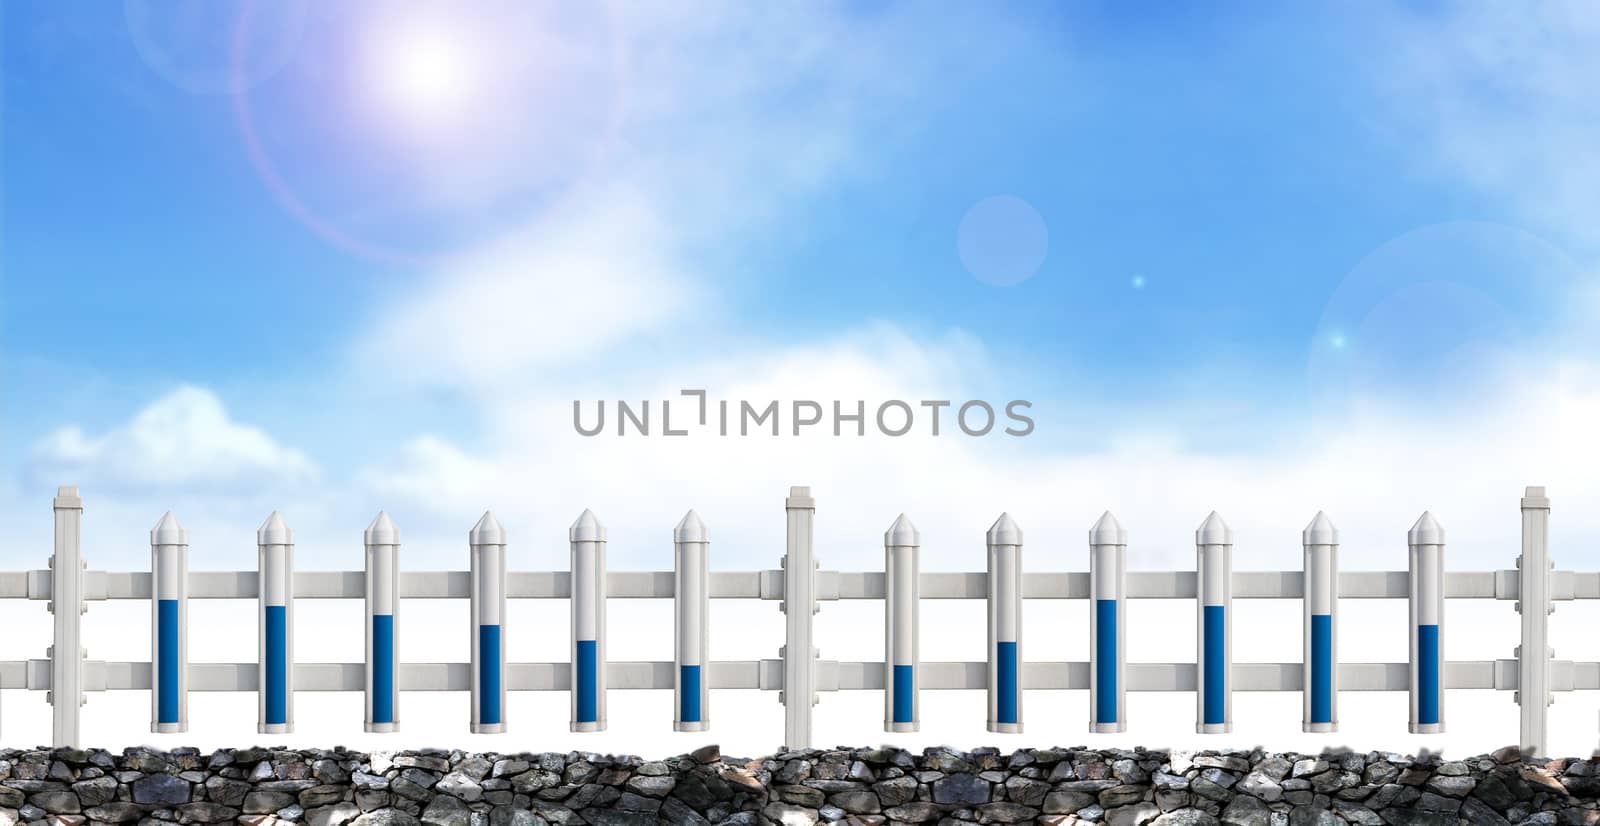 A row of white fence in the blue sky